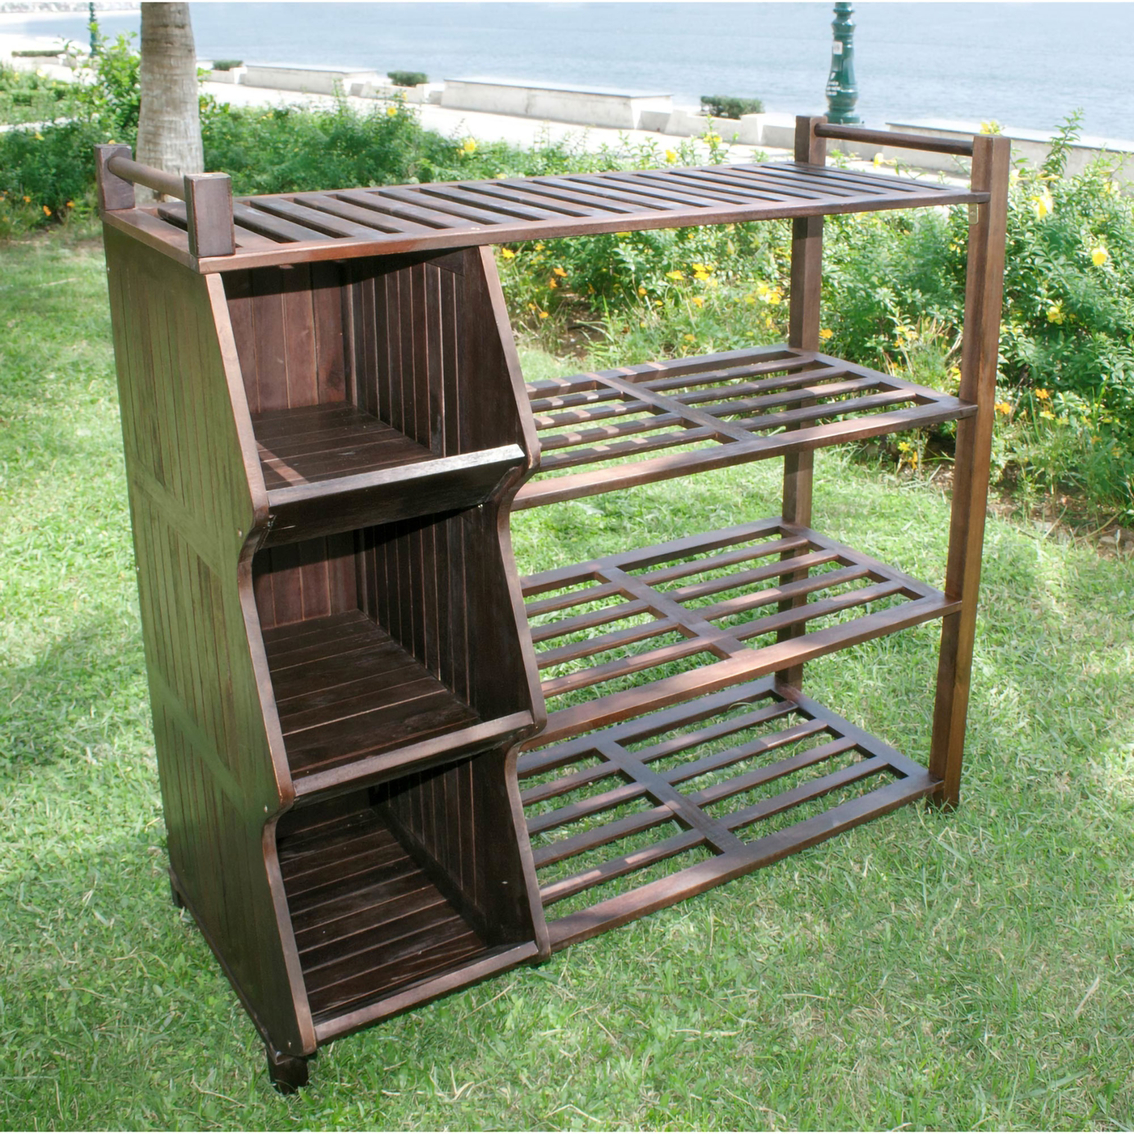 Northbeam Outdoor Shoe Rack and Cubby - Image 3 of 8